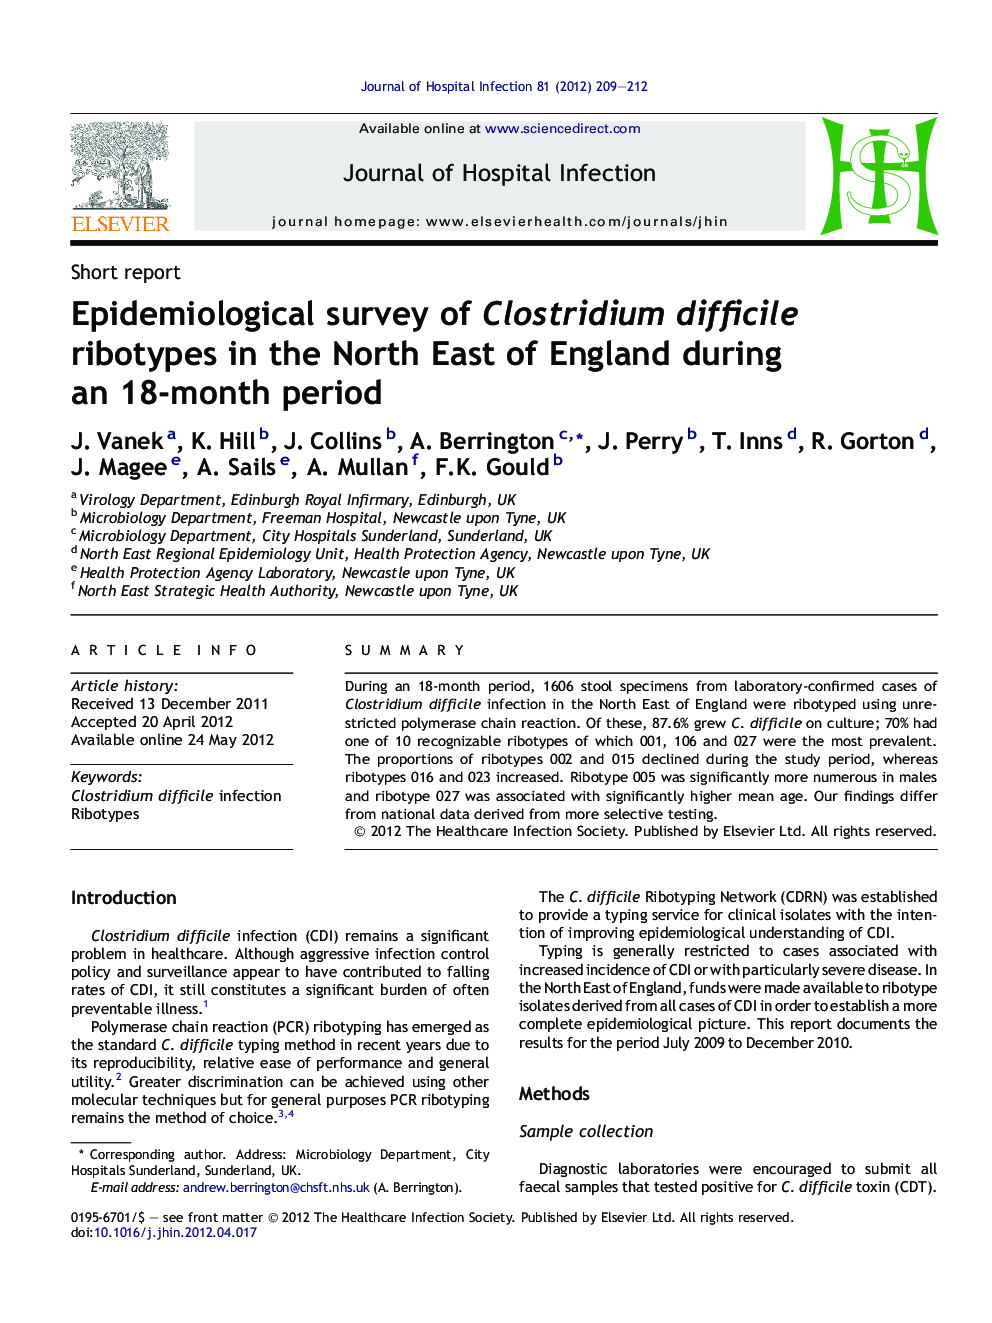 Epidemiological survey of Clostridium difficile ribotypes in the North East of England during an 18-month period